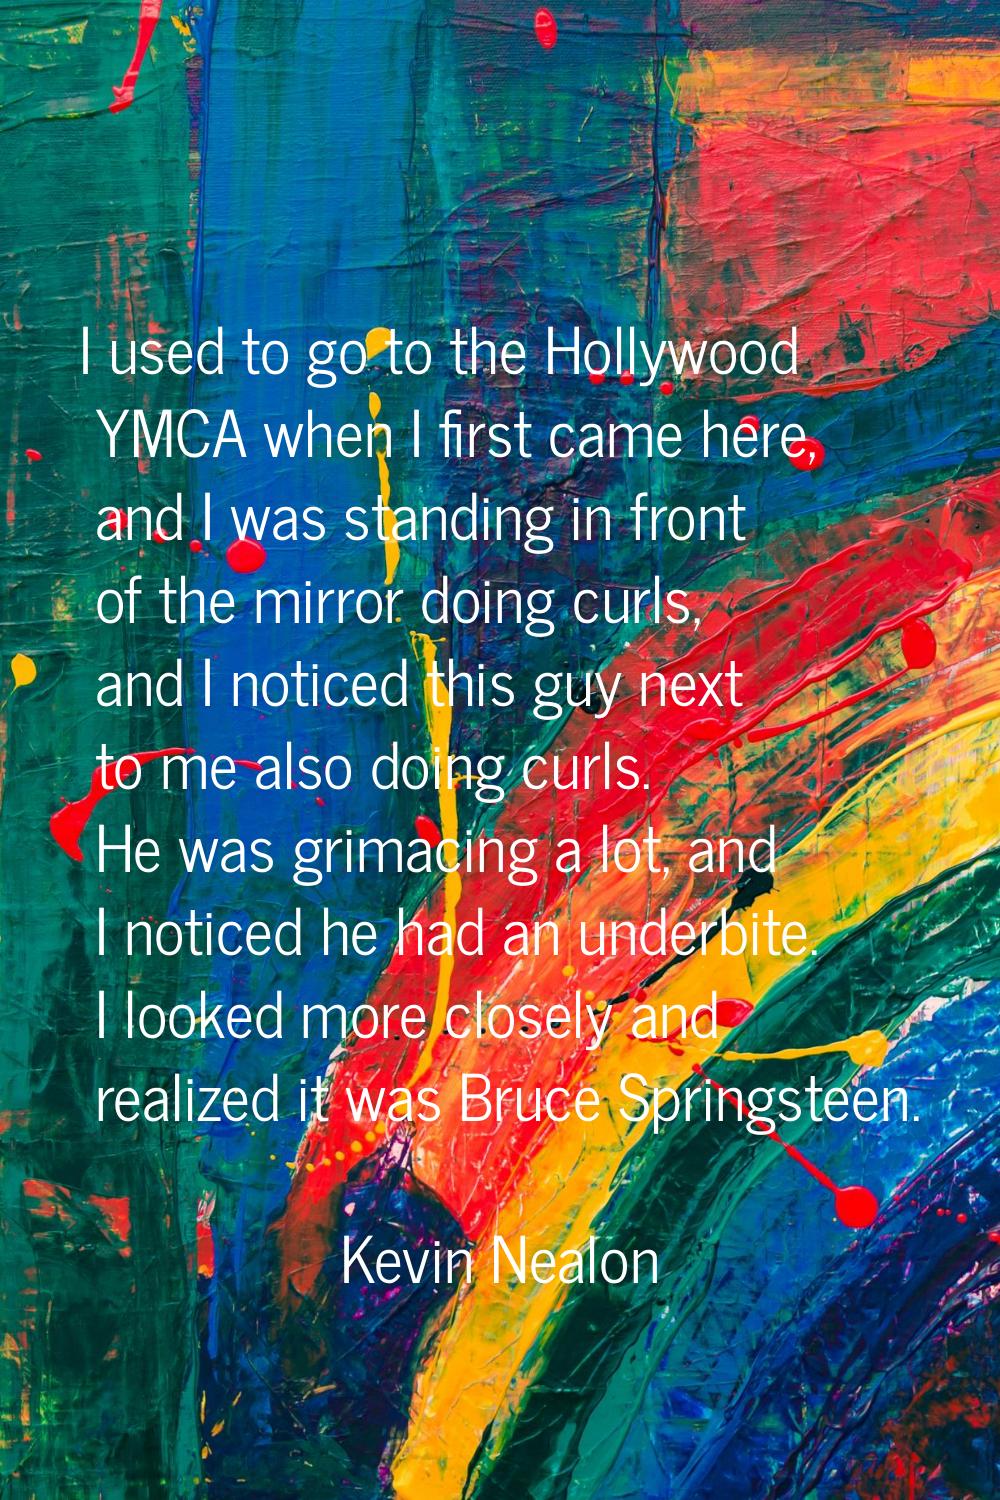 I used to go to the Hollywood YMCA when I first came here, and I was standing in front of the mirro